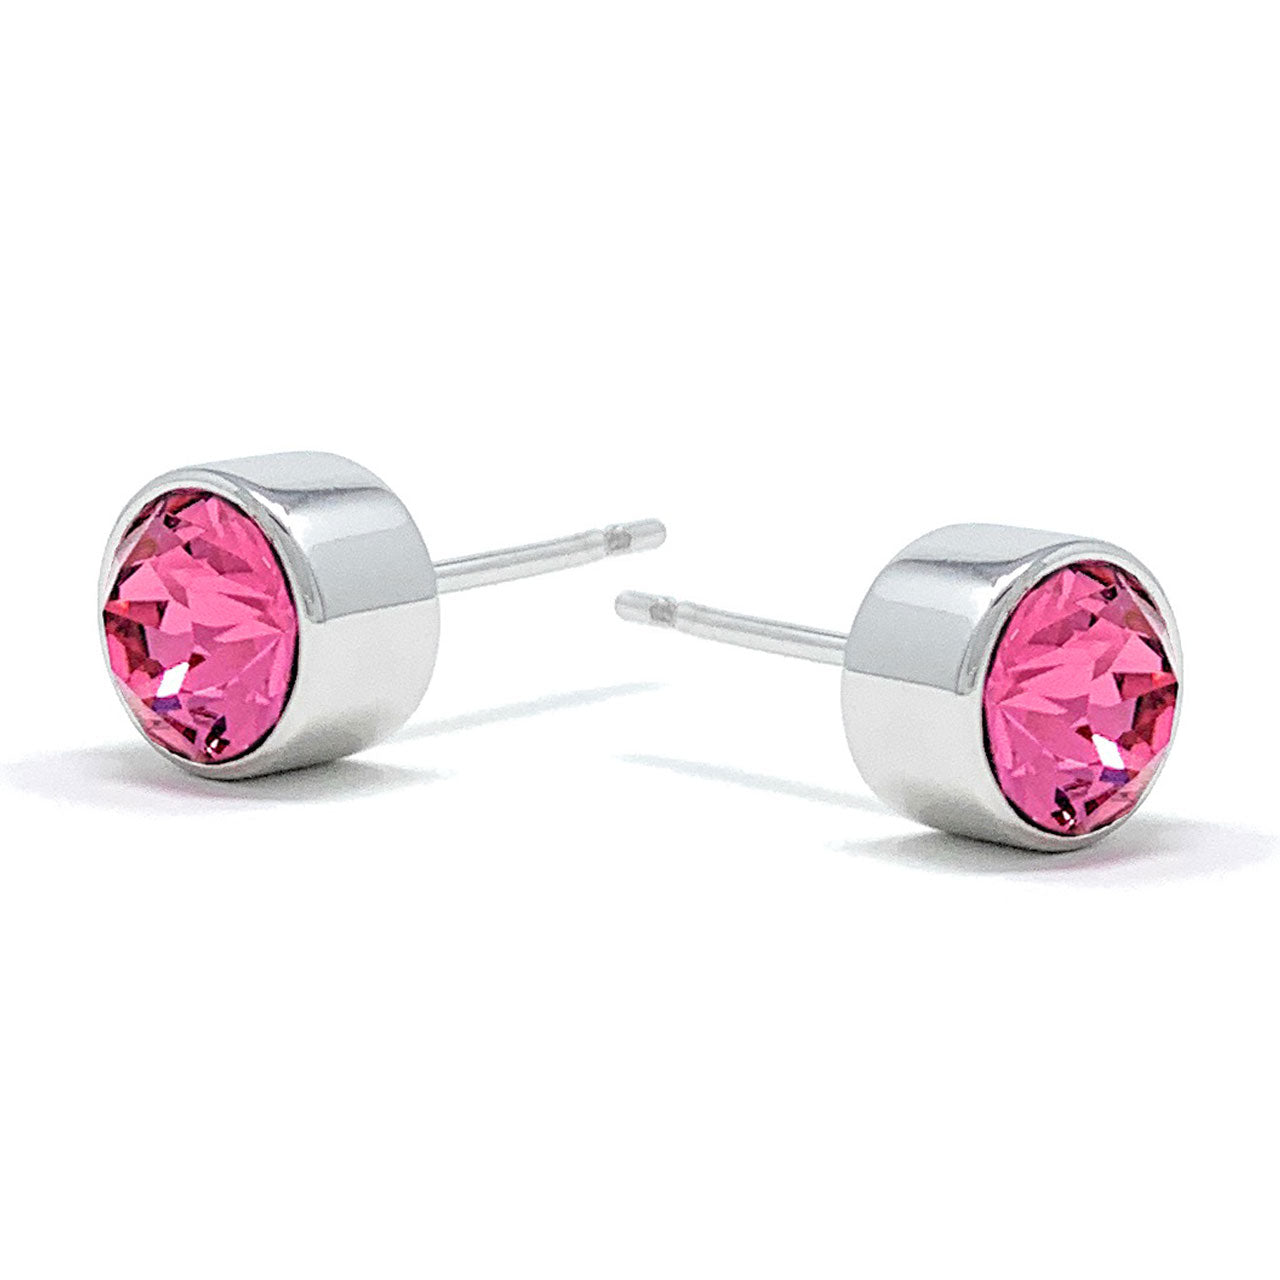 Harley Small Stud Earrings with Pink Rose Round Crystals from Swarovski Silver Toned Rhodium Plated - Ed Heart